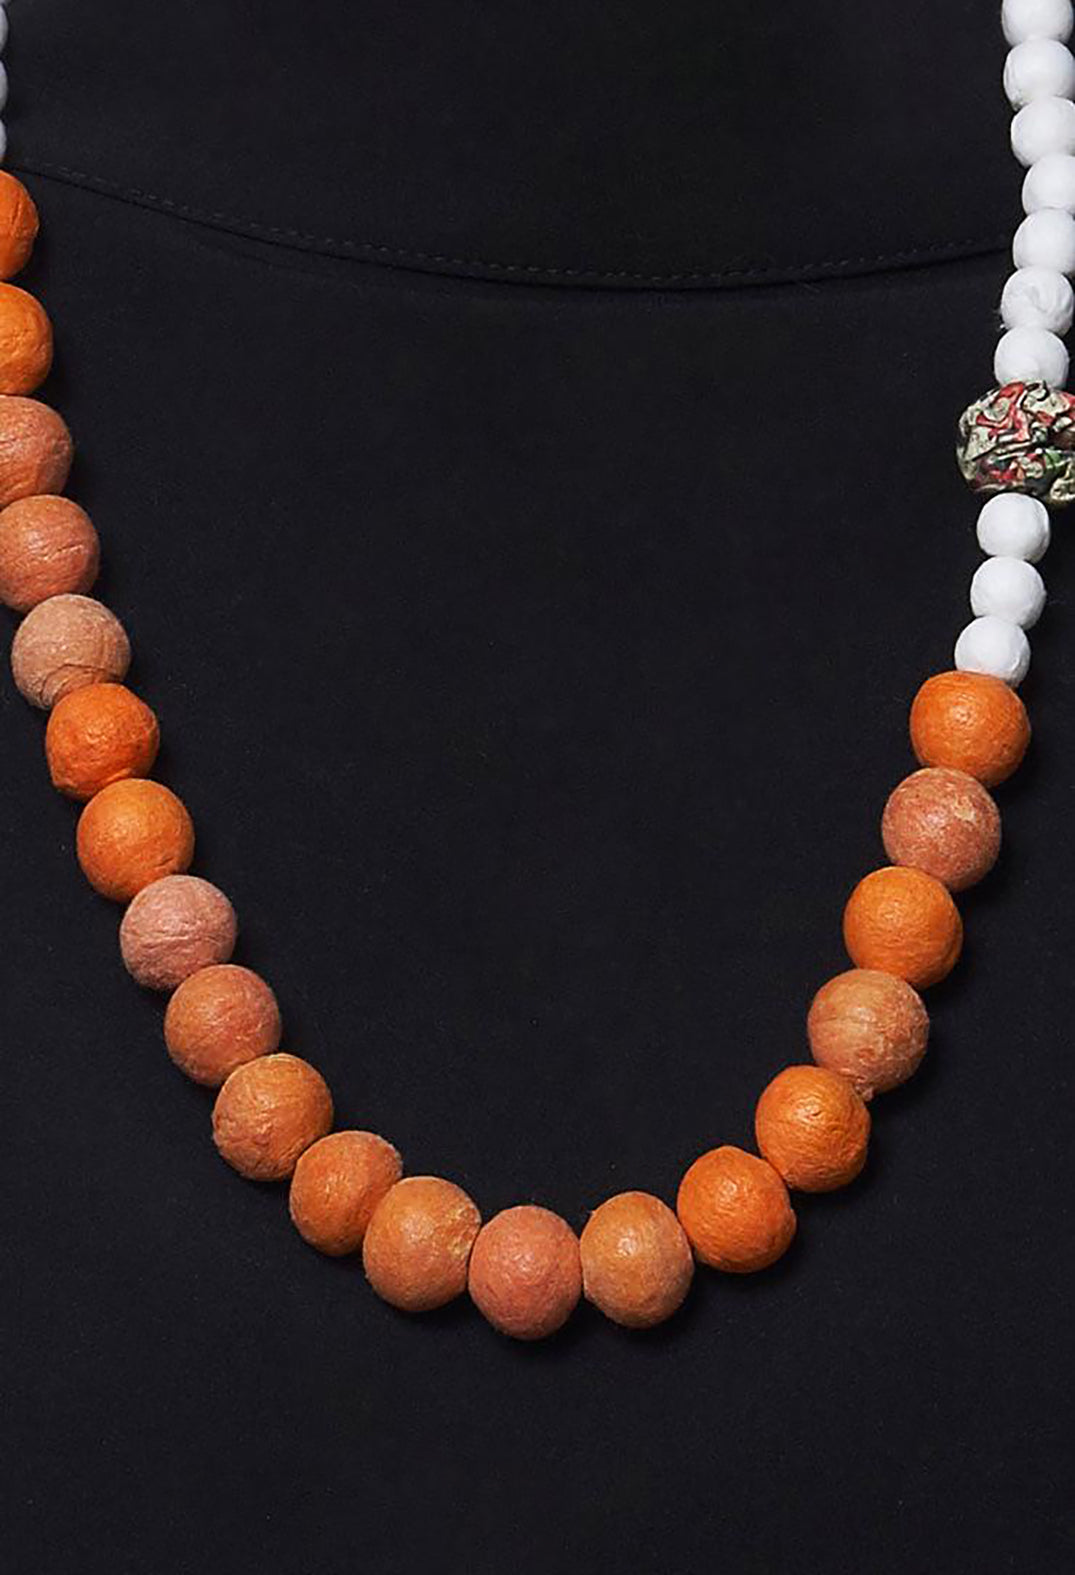 Beaded Necklace with Paper Mache Ball in Orange/White